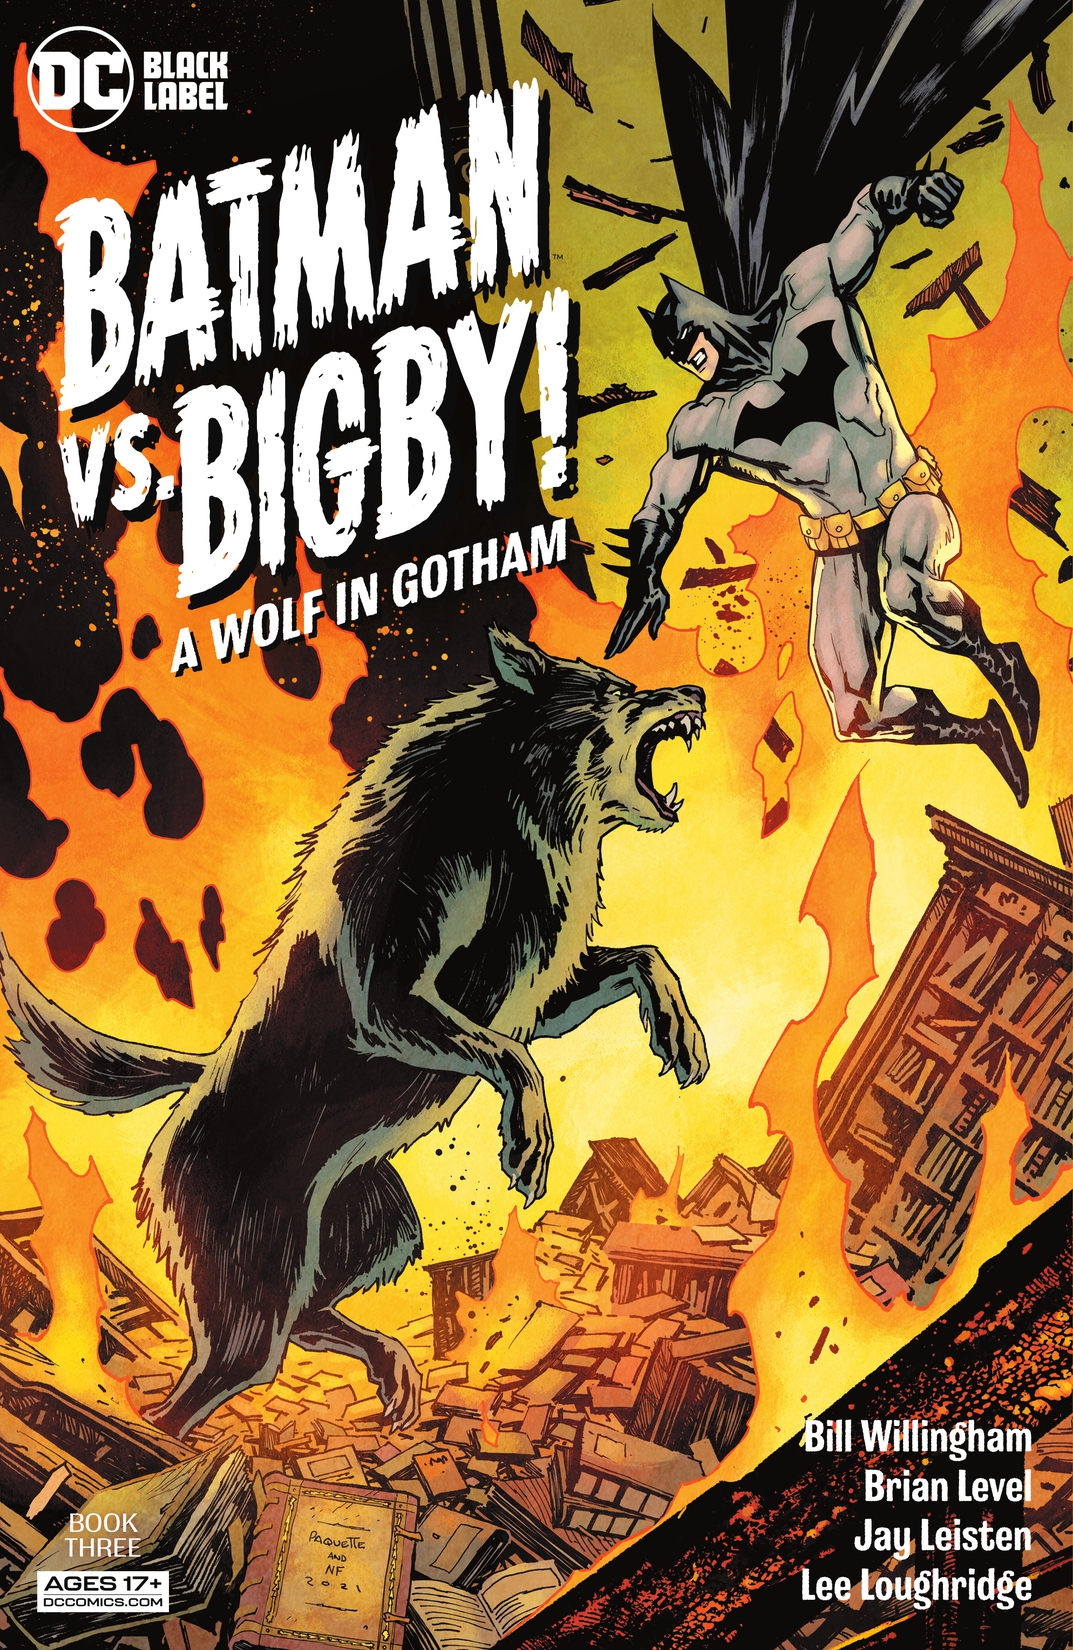 Batman Vs. Bigby! A Wolf In Gotham #3 preview images